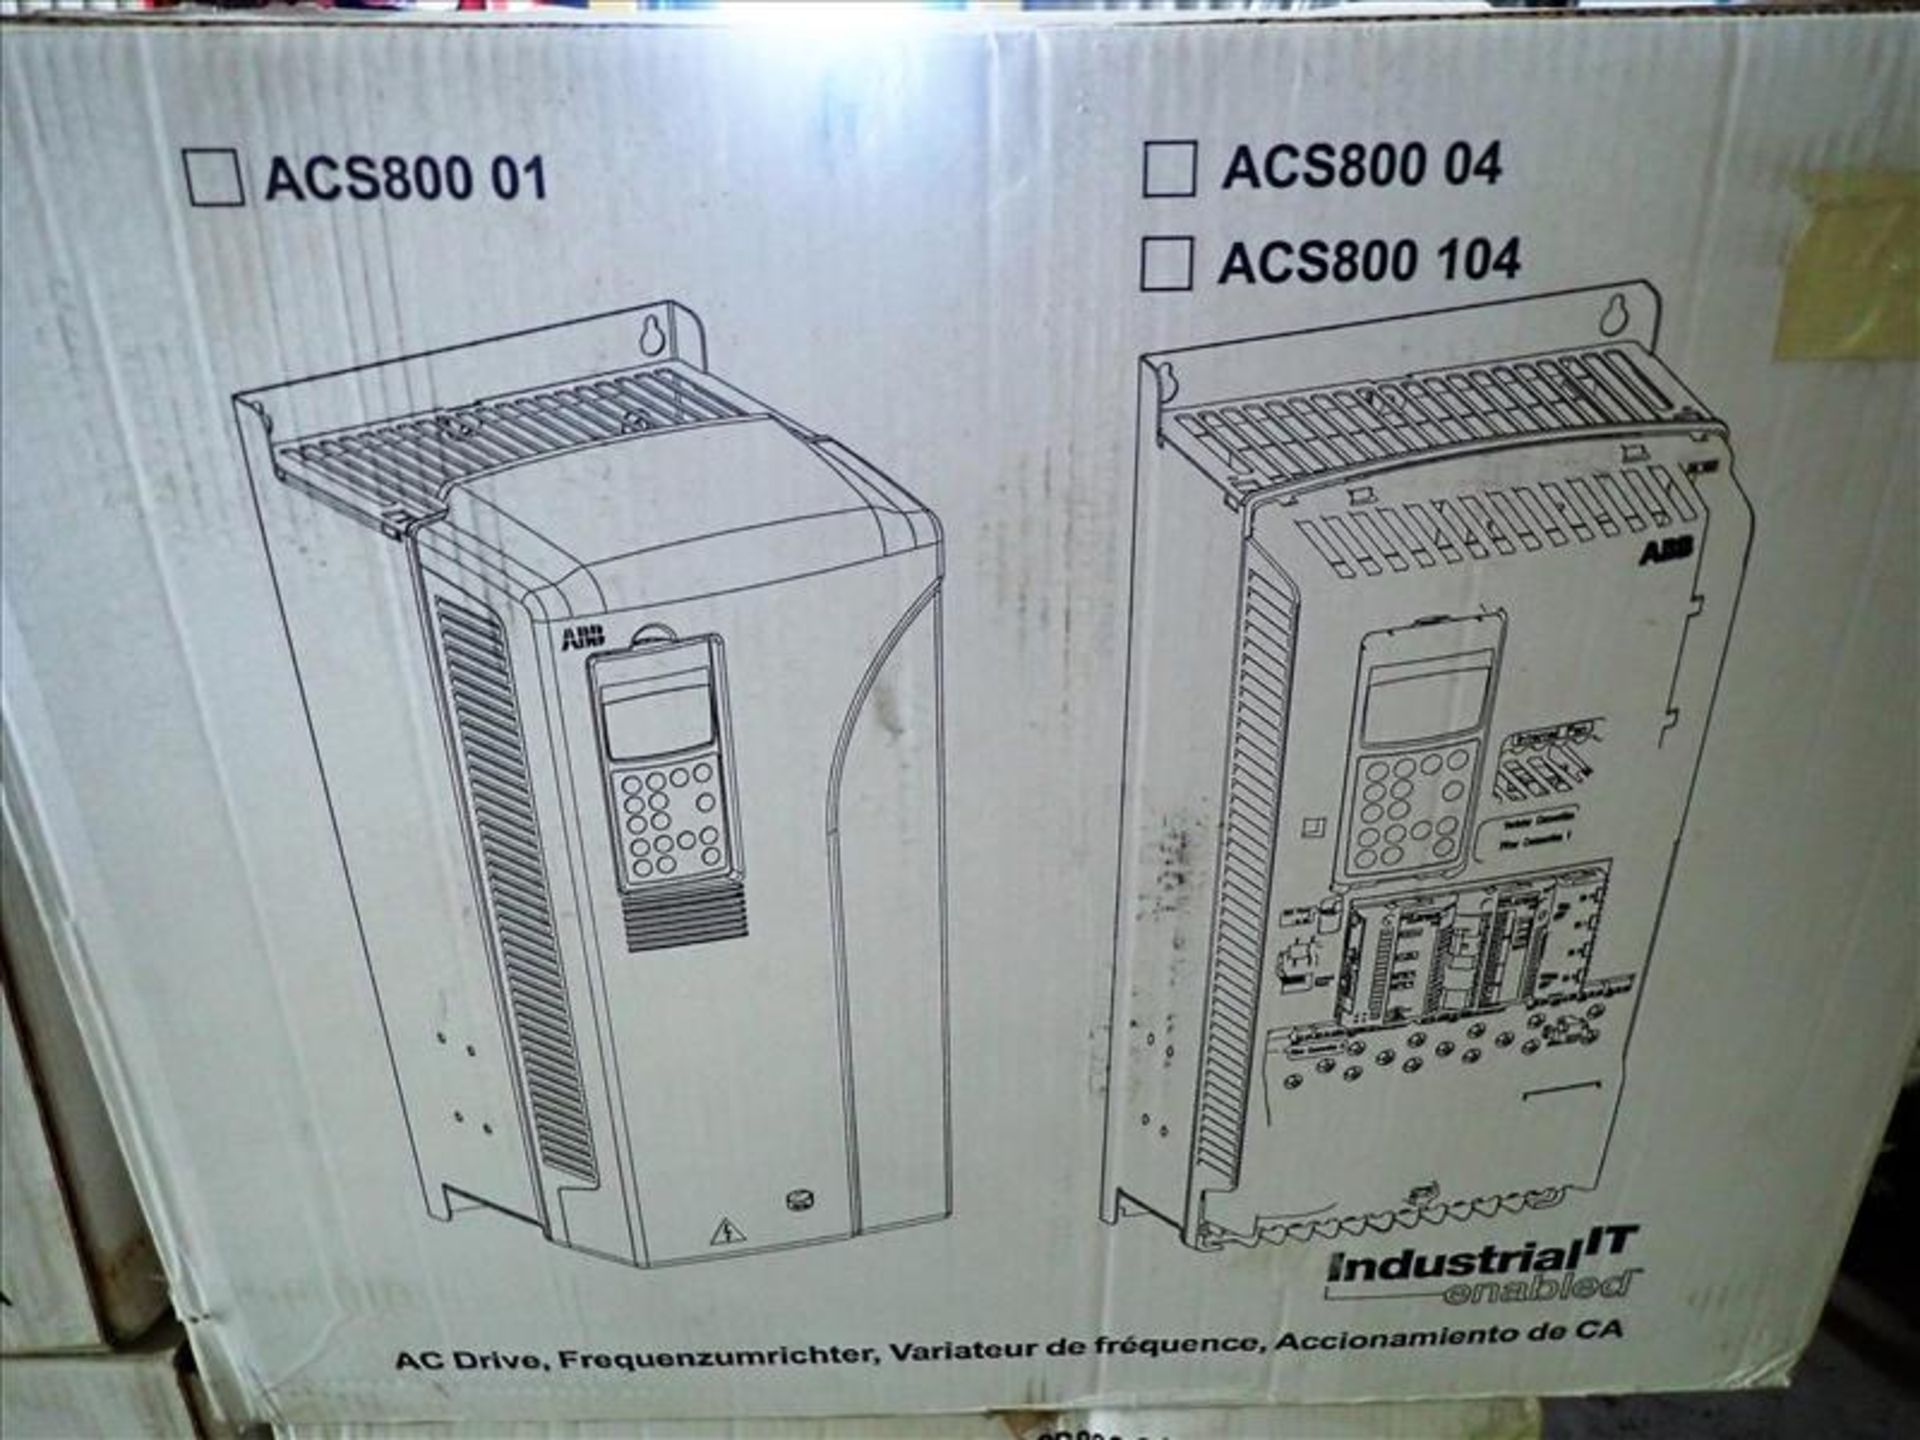 (NEW) ABB Variable Frequency Drives (VFD), incl.: (5) mod. ACS800-04-0020-7; (3) mod. ACS800-04- - Image 2 of 3